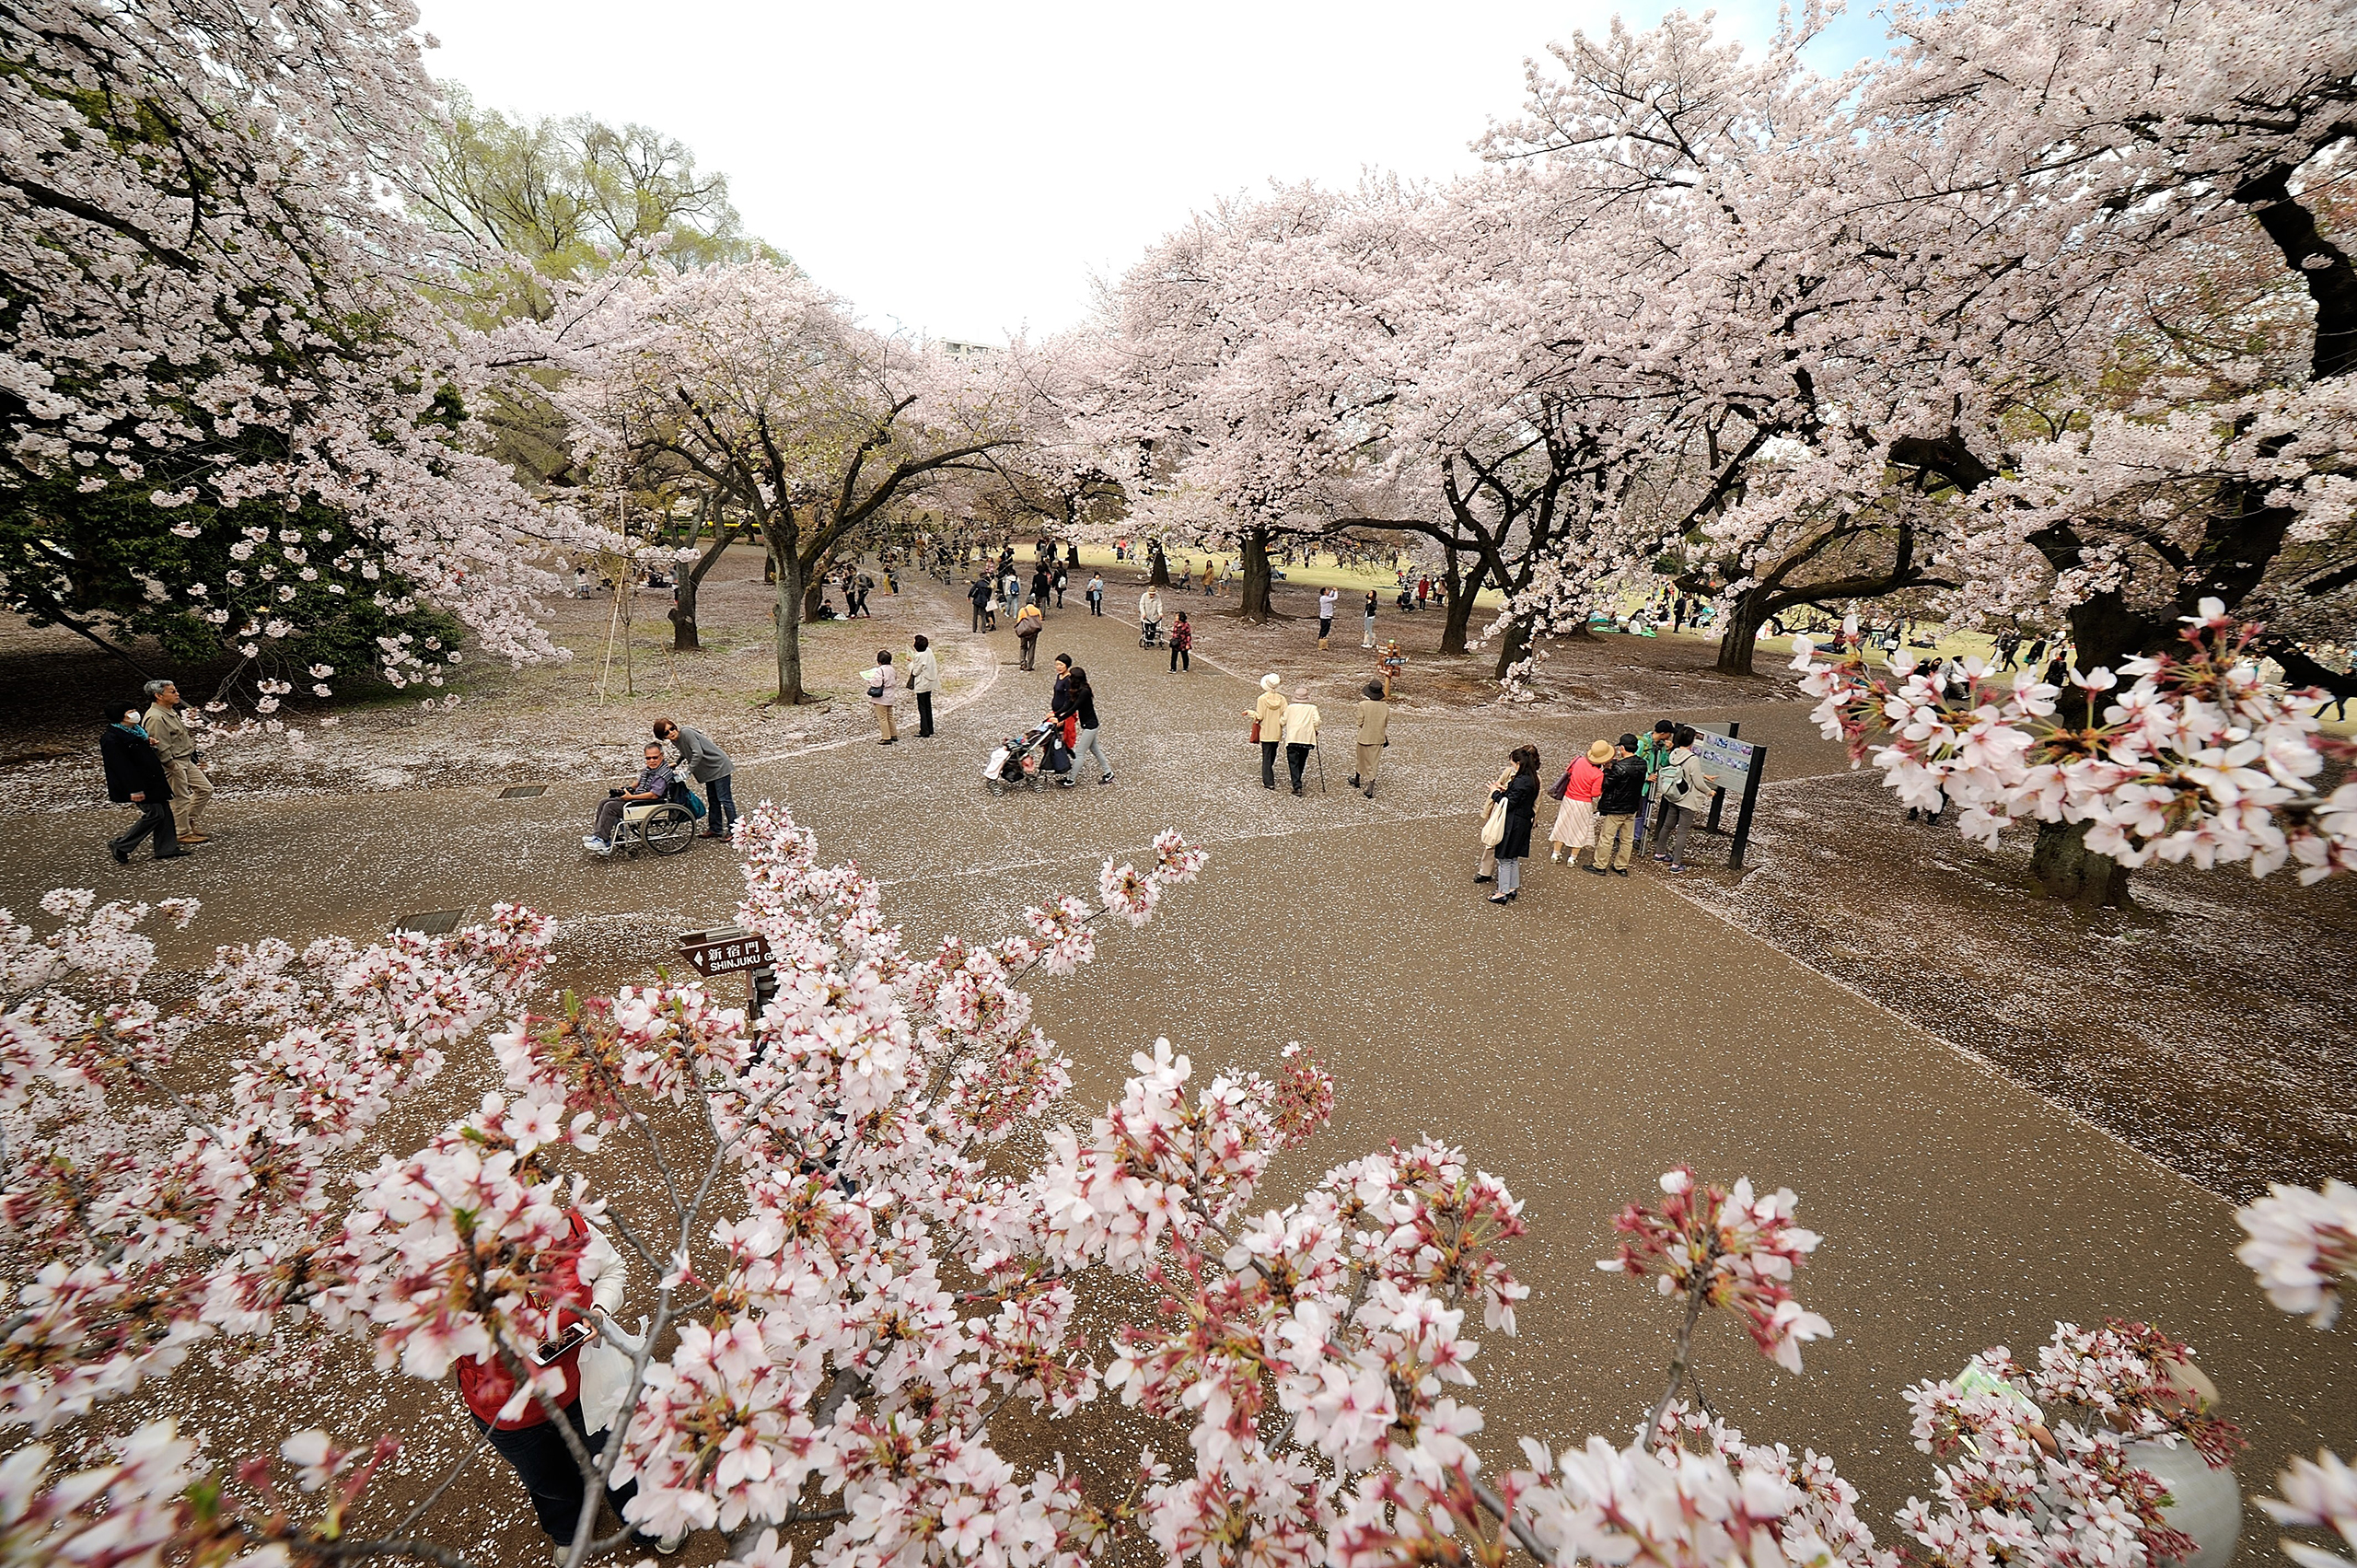 People enjoy the last day of Hanami, a traditional picnic between family, friends or colleague to enjoy the cherry blossoms in Tokyo's Shinjuku Park on April 6, 2016. (David Mareuil—Anadolu Agency/Getty Images)